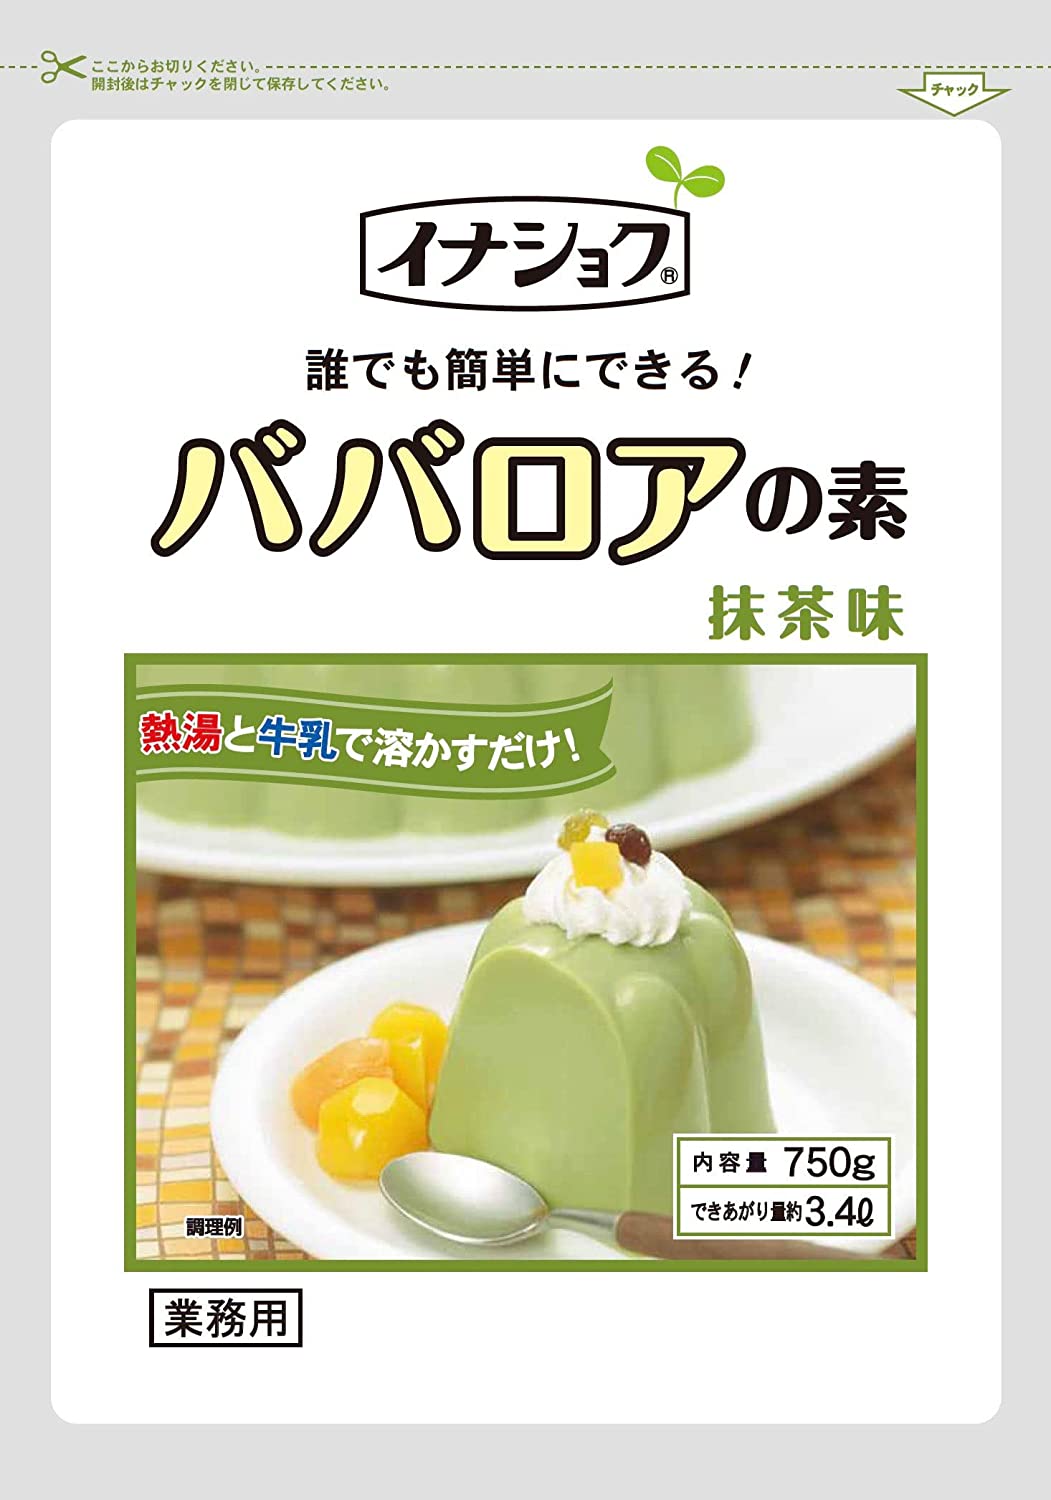 <strong>伊那食品</strong> <strong>ババロアの素</strong> <strong>抹茶</strong> 750g 【イナショク 業務用 デザート】